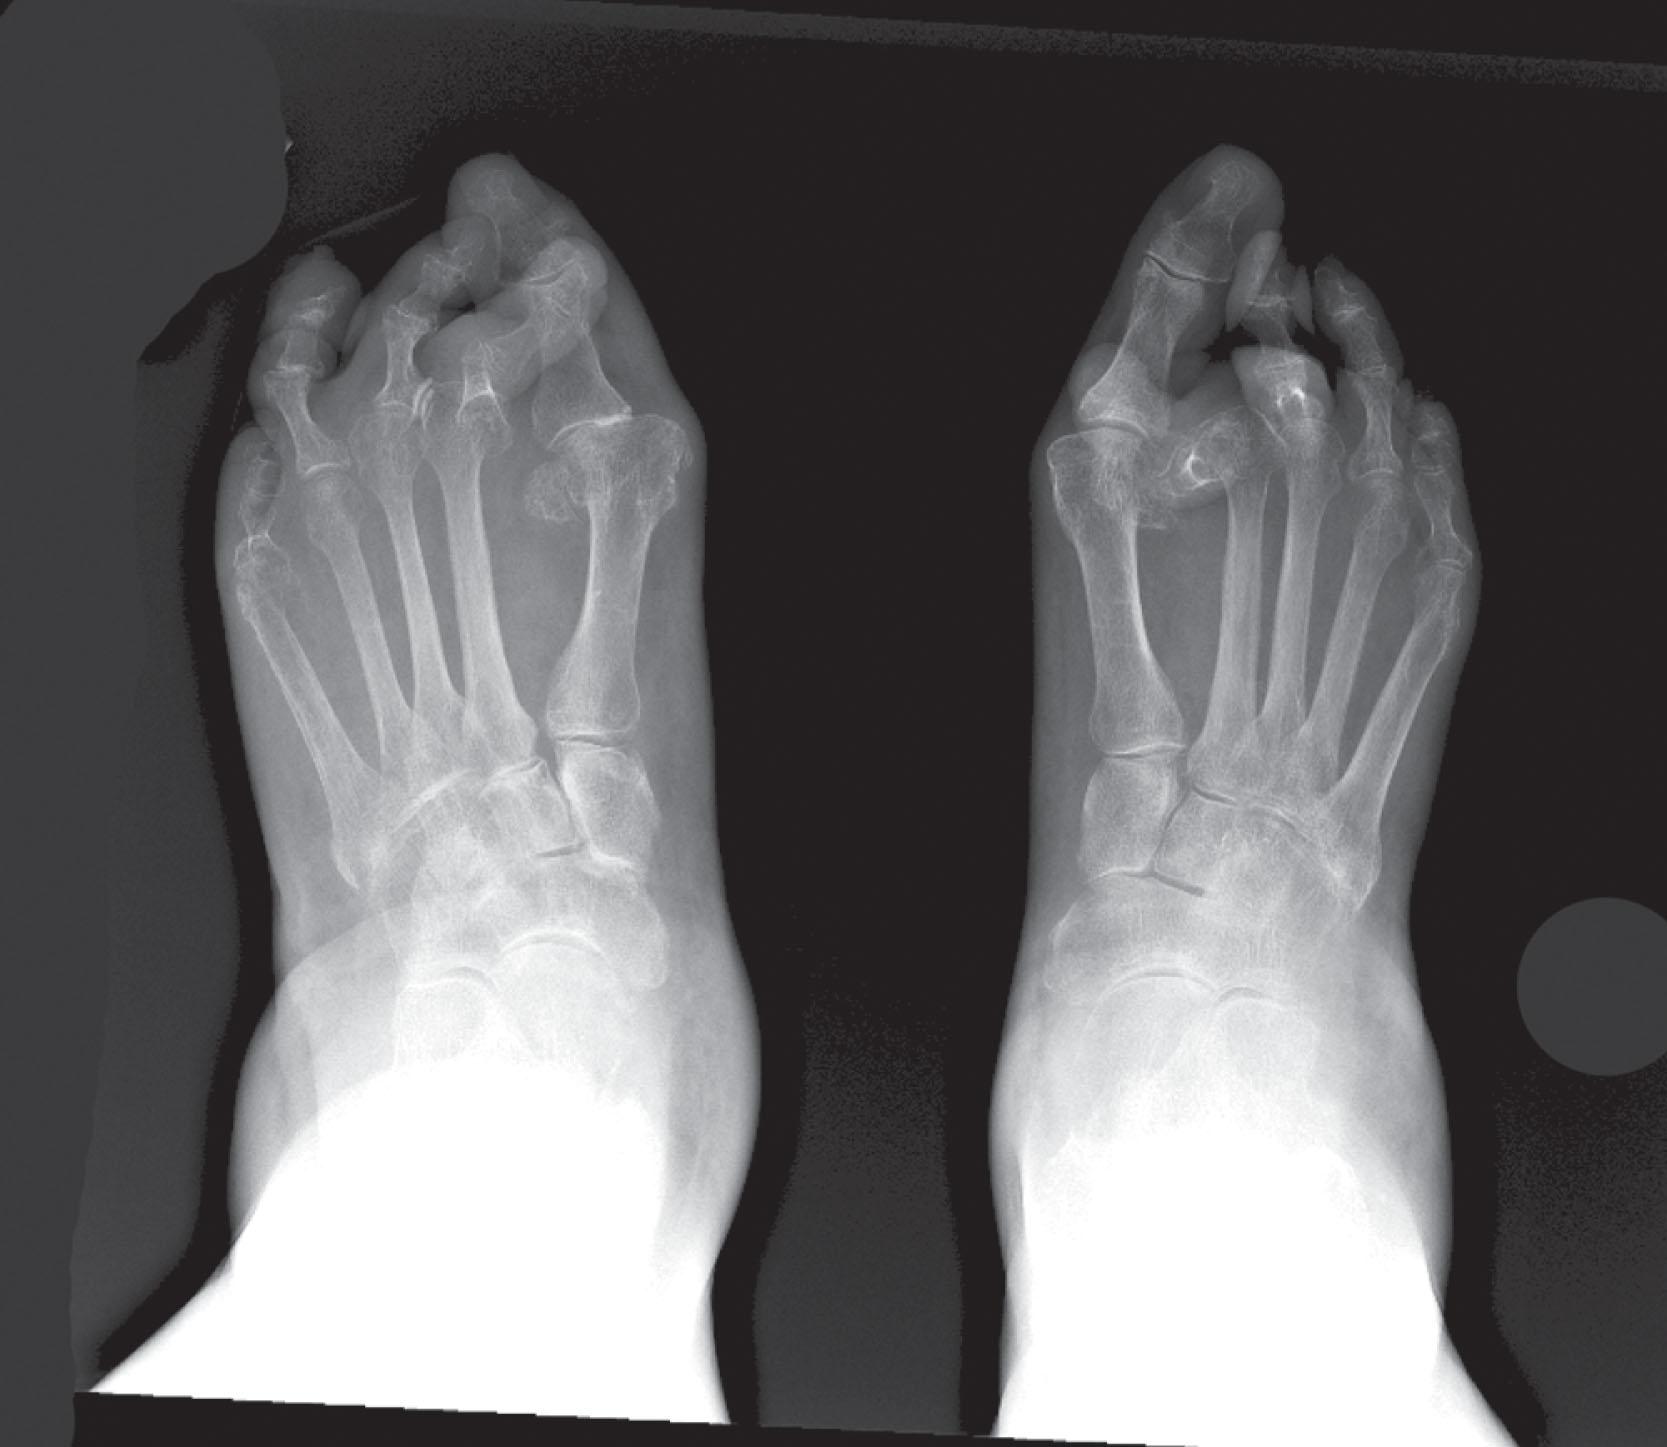 Fig. 21-22, Radiograph of a patient with rheumatoid arthritis. Second metatarsophalangeal joints are dislocated bilaterally with severe crossover deformities.